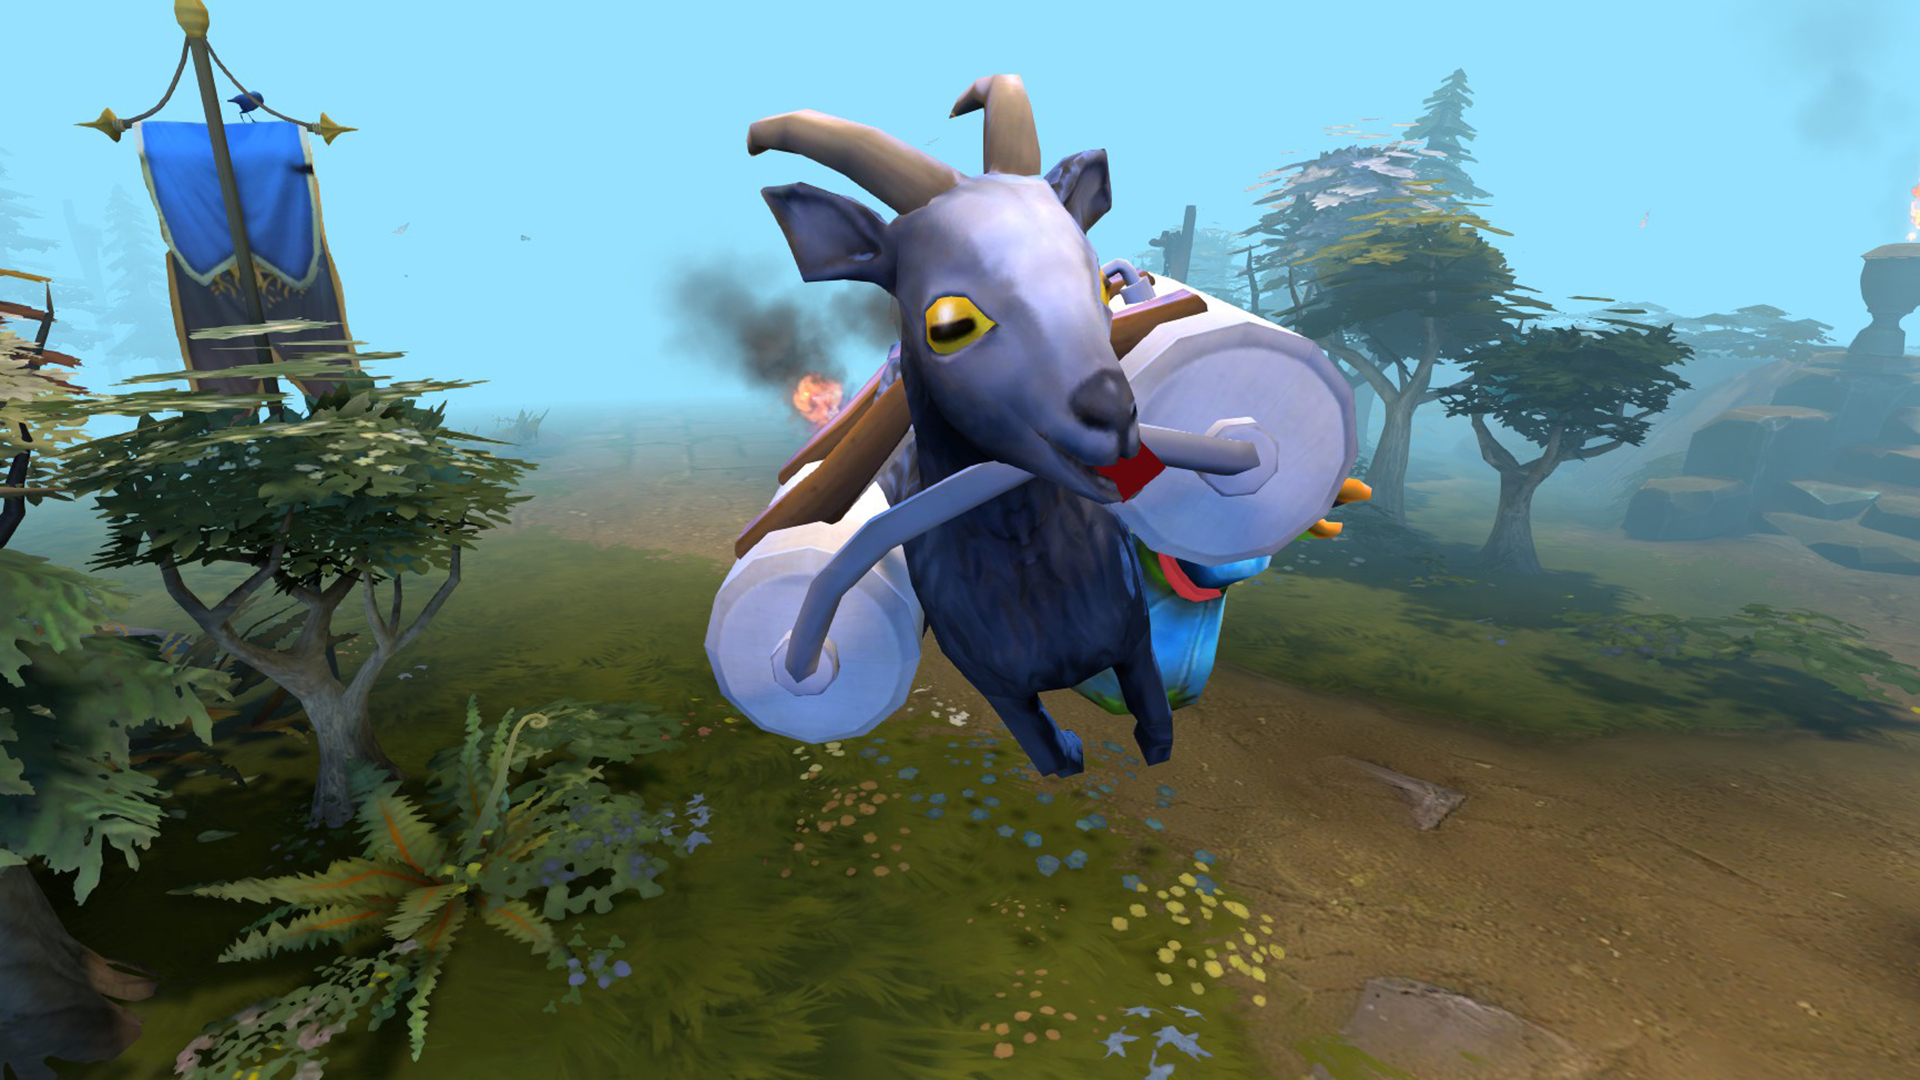 The Goat From Goat Simulator Would Make An Excellent Dota 2 Courier